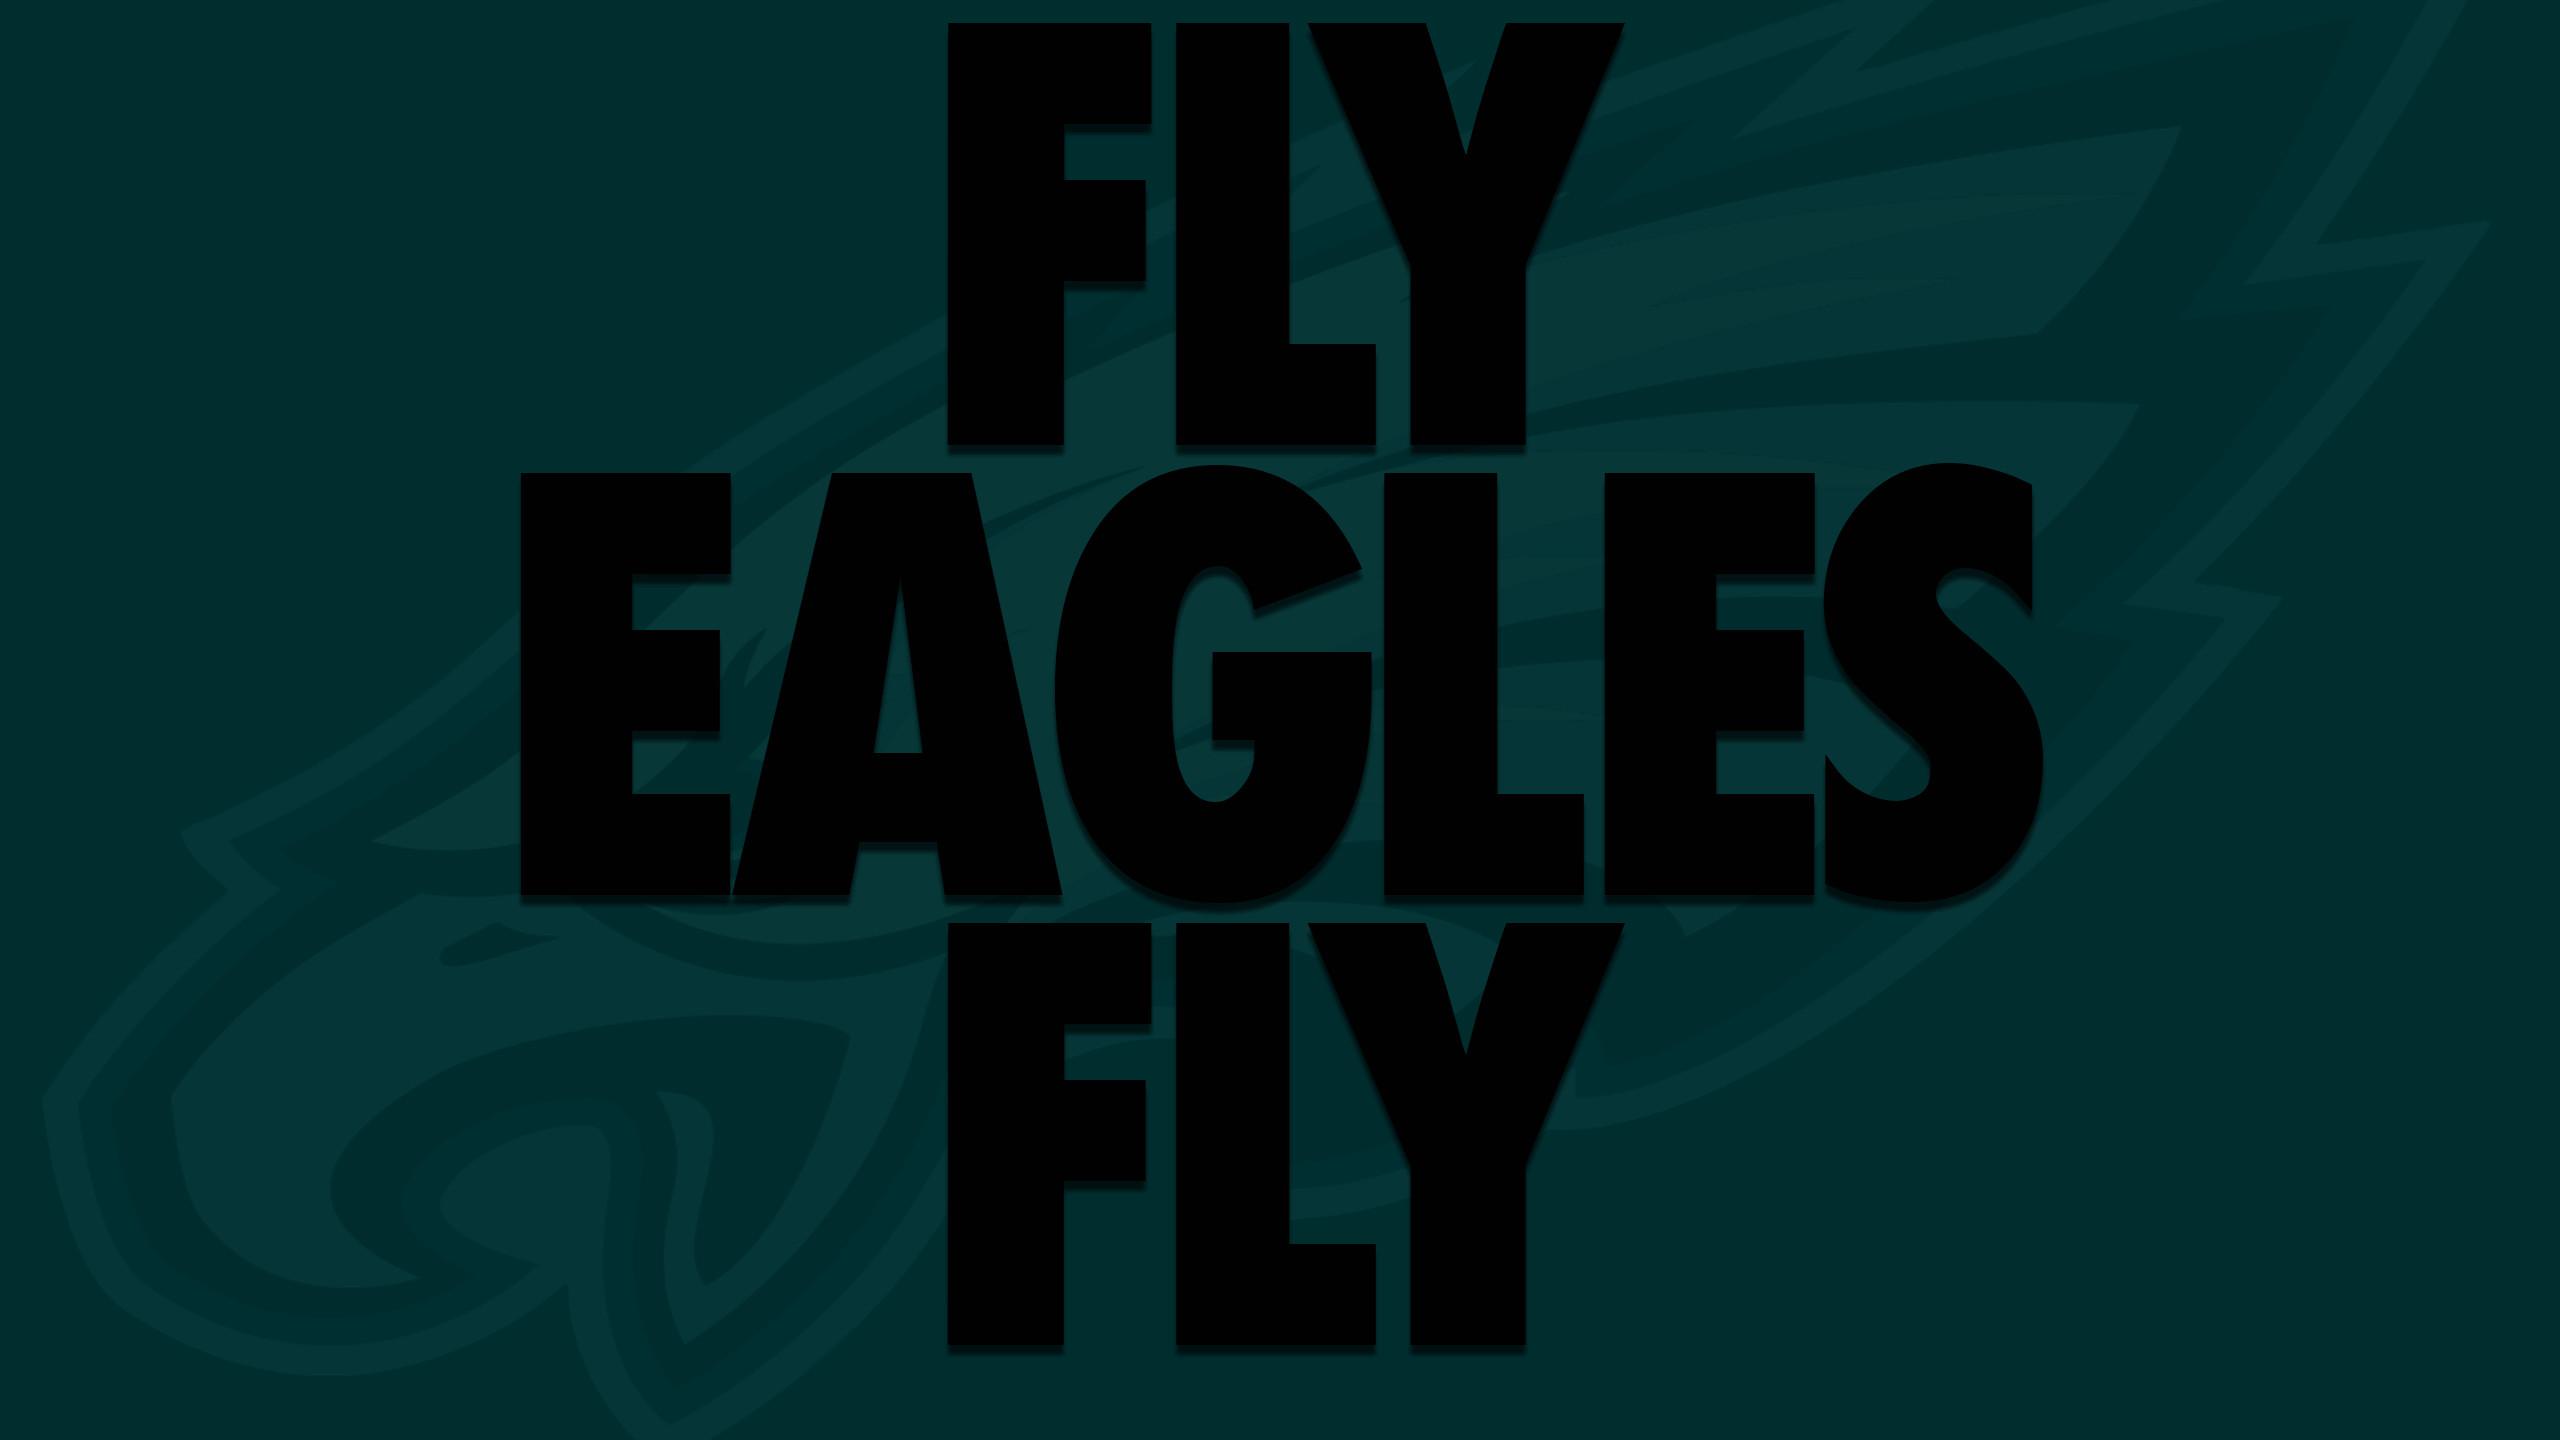 77+ Nfl Eagles Wallpapers